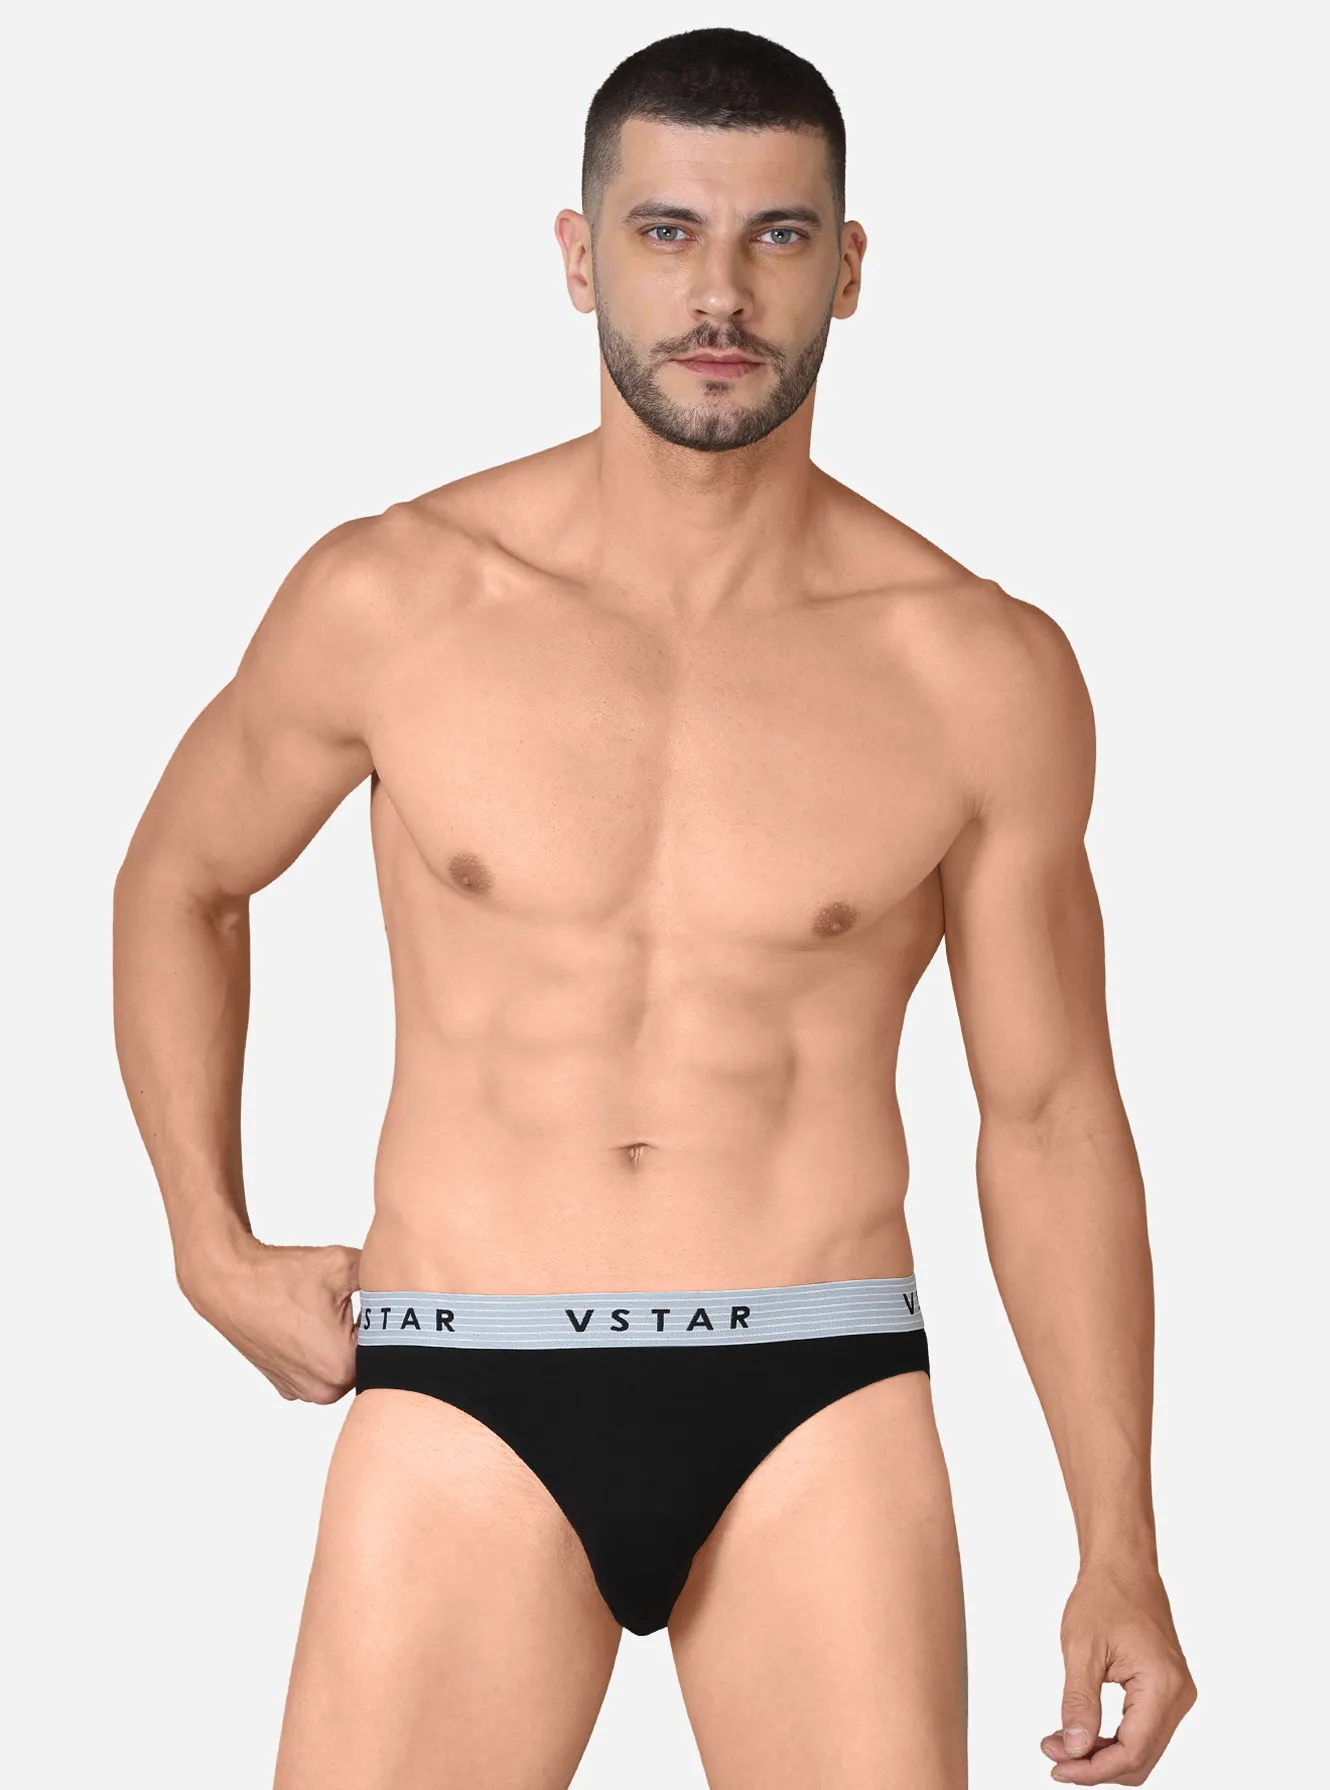 Premium combed cotton brief with square cut styling & concealed waist band, Buy Mens & Kids Innerwear